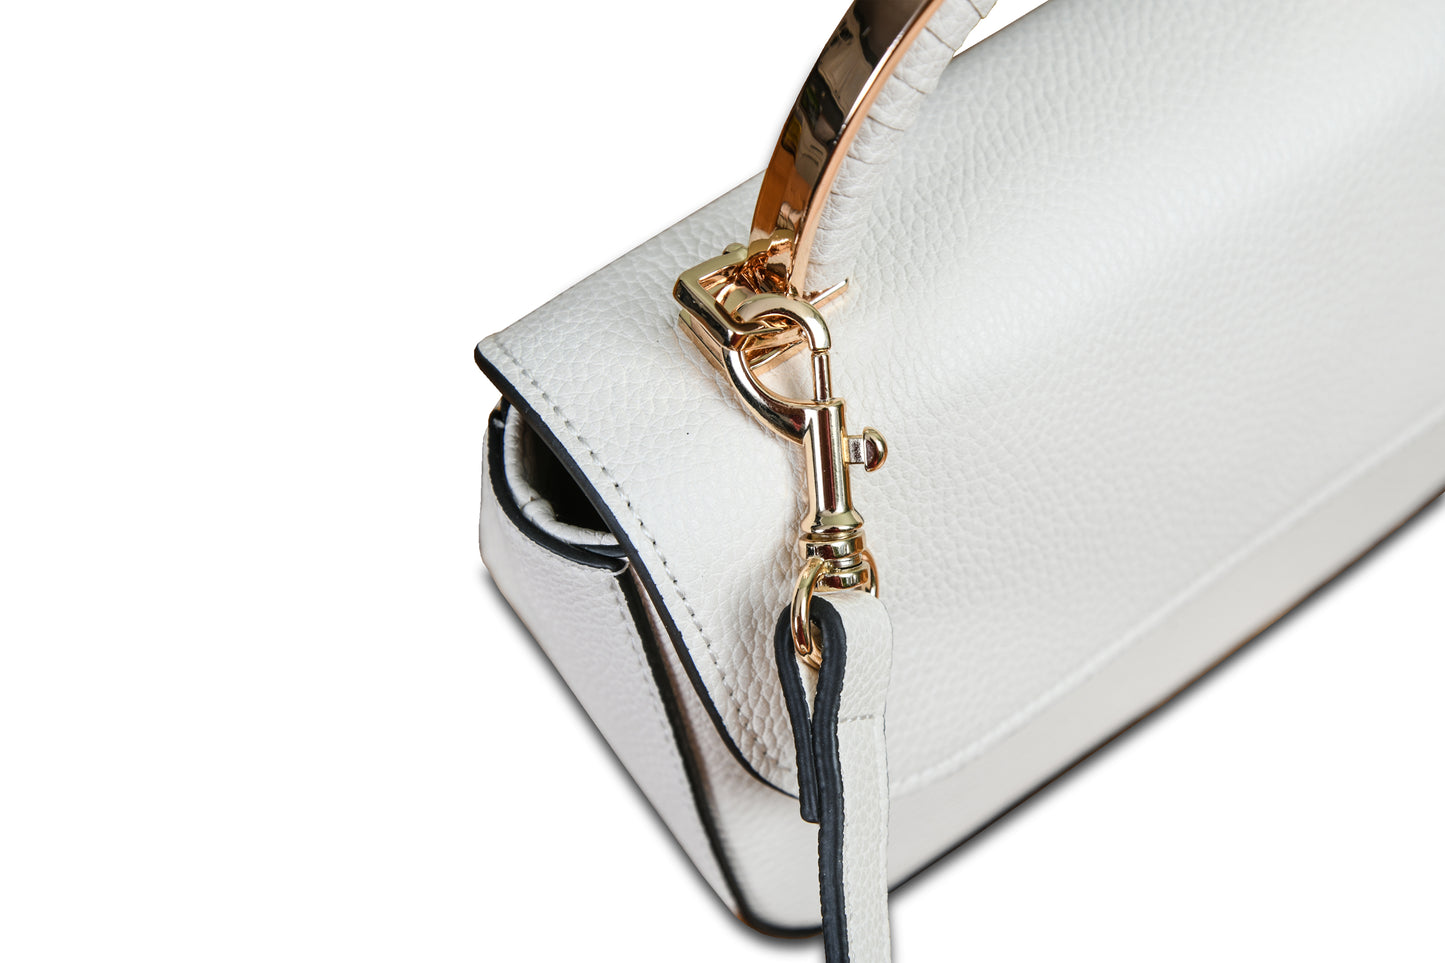 Mini Crossbody Pebble Grain Faux Leather Pearl White Handbag made by Dewi Maya gold shoulder strap clasp available at the best boutique in Upstate South Carolina Spartanburg Greenville Dewi Maya Boutique